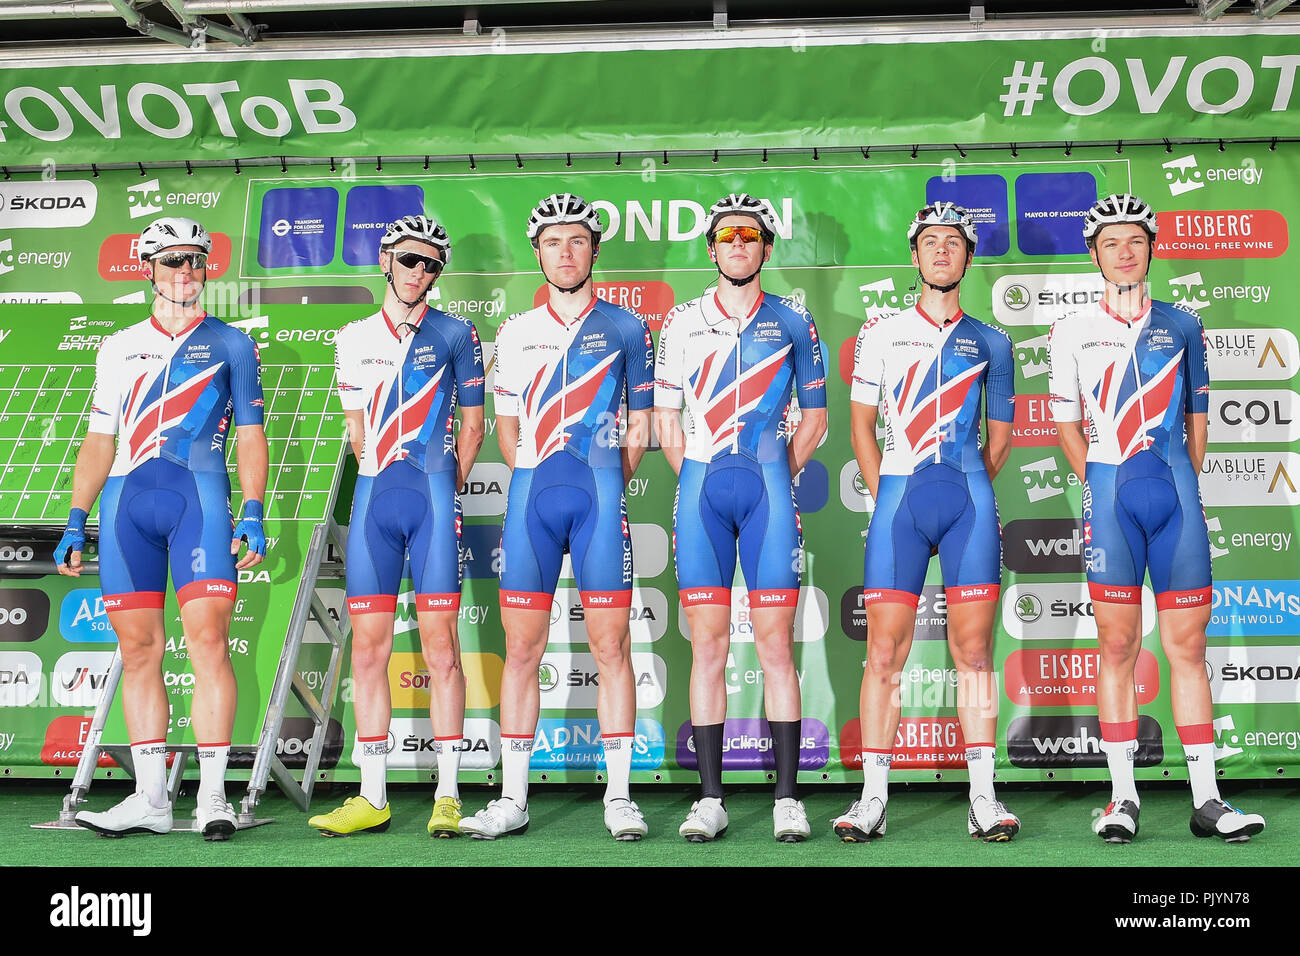 London, UK. 9th Sept 2018. Team of Great Britain - Ben Swift, Matthew Bostock, Ethan Hayter, Joe Nally, Stephen Williams and Fred Wrightat the team presentation during 2018 OVO Energy Tour of Britain - Stage Eight: The London Stage on Sunday, September 09, 2018, LONDON ENGLAND: Credit: Taka Wu/Alamy Live News Stock Photo